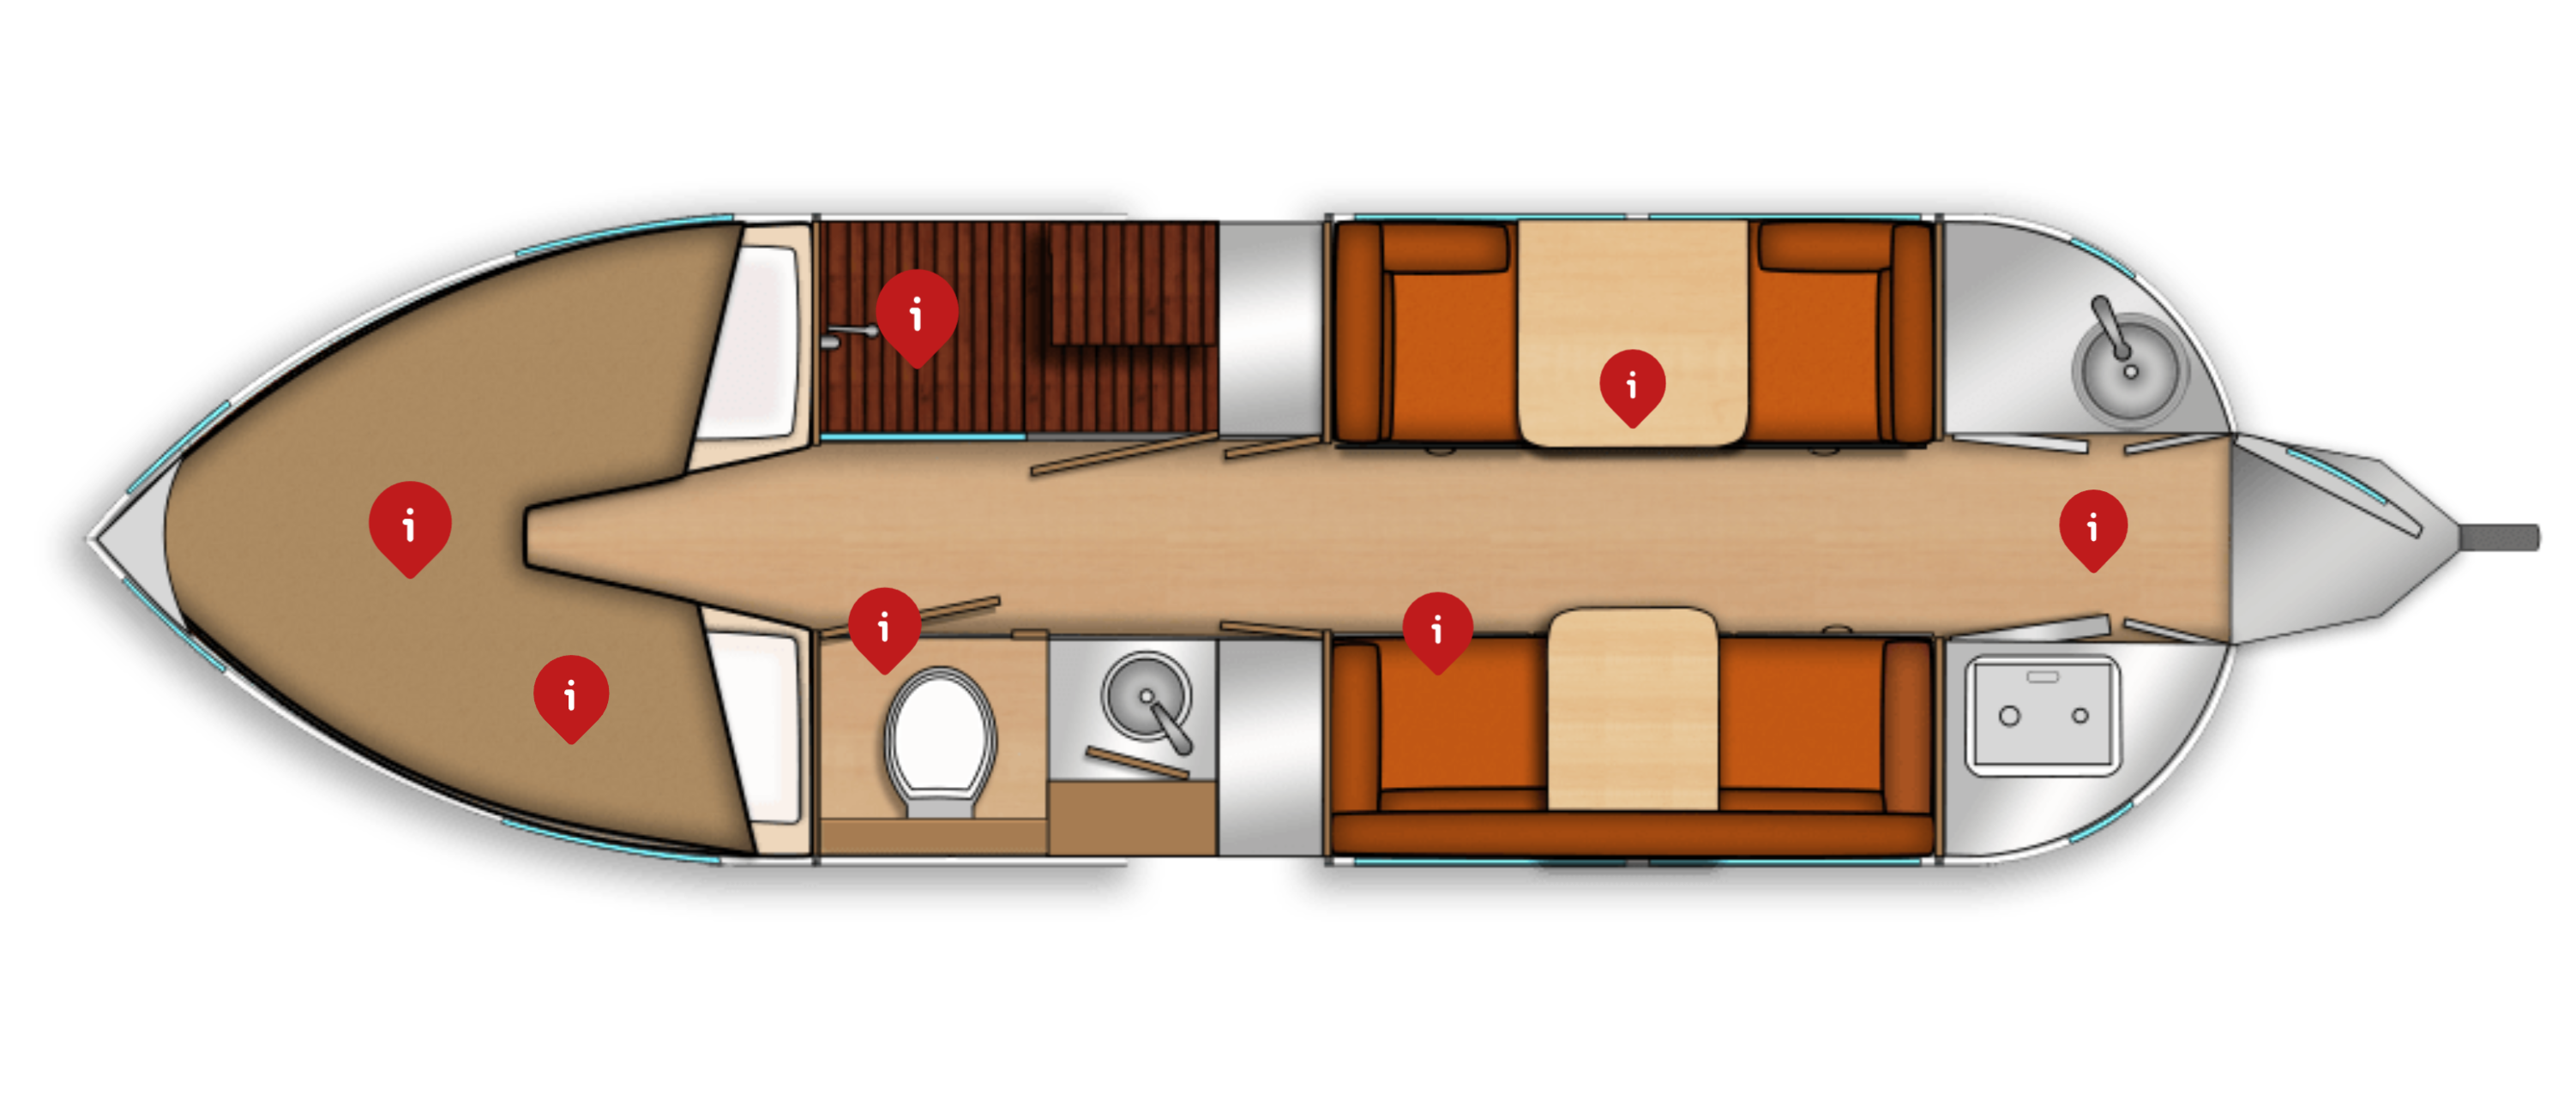 How to Pick the Right RV Floor Plan